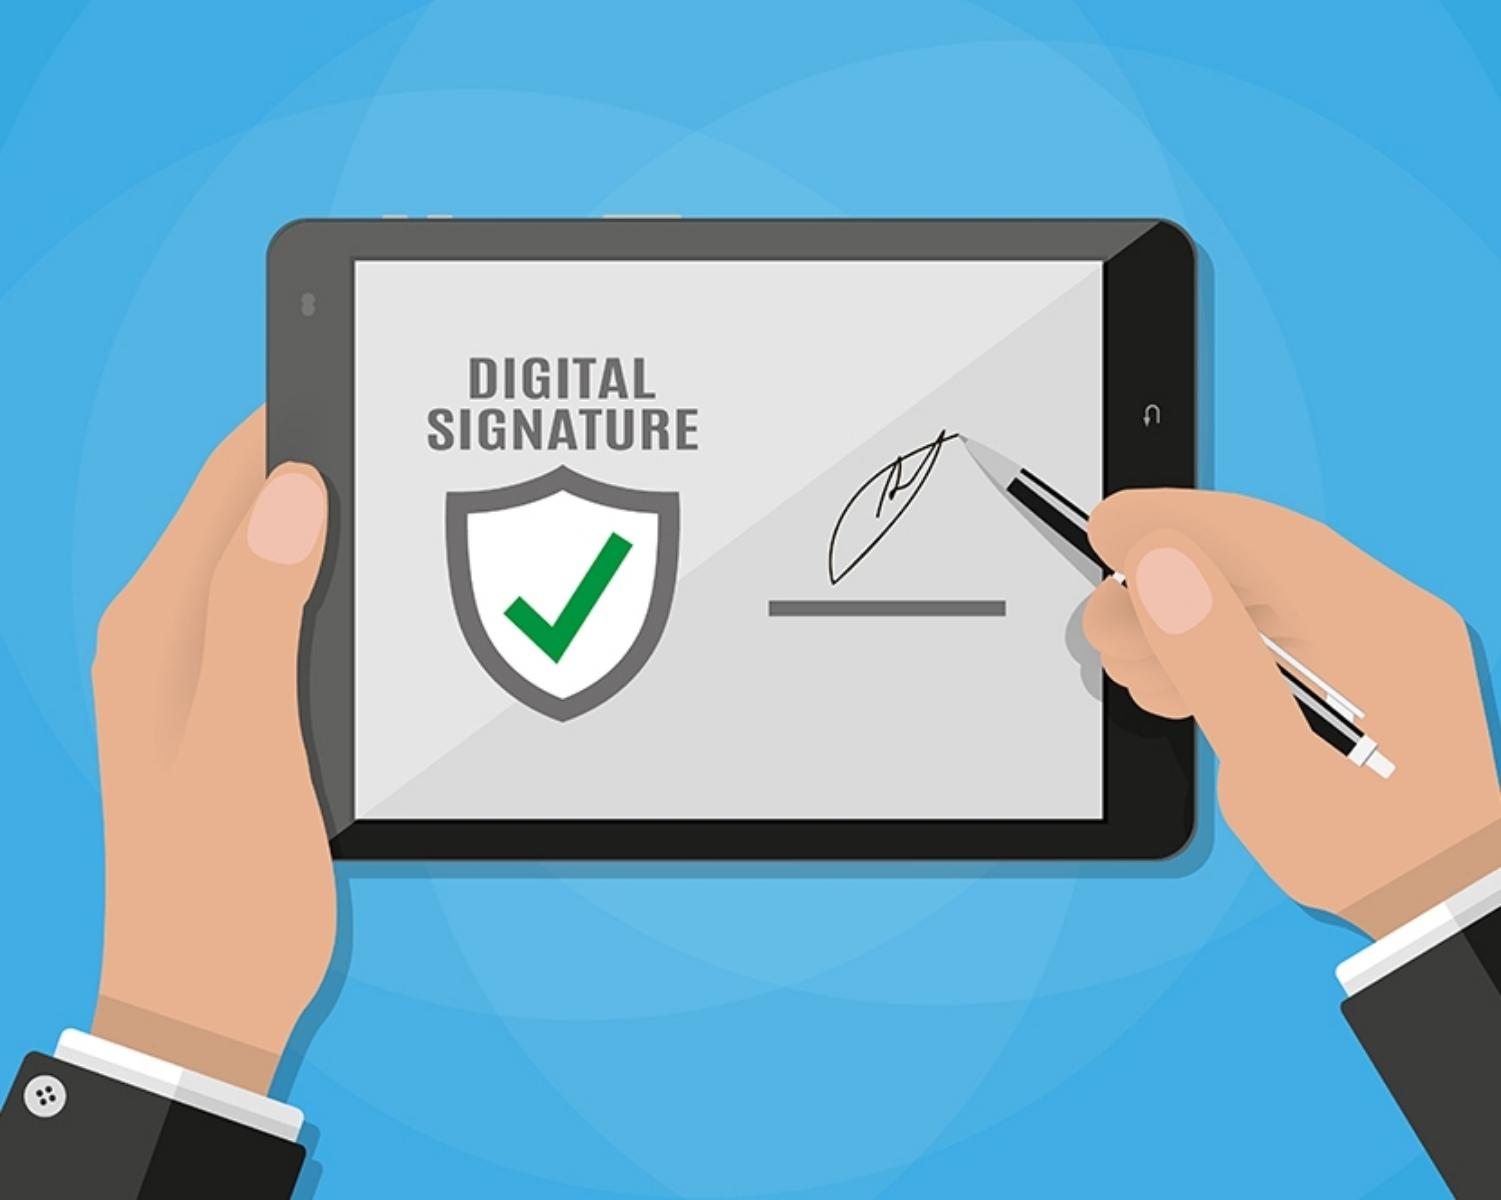 What Is A Digital Signature?